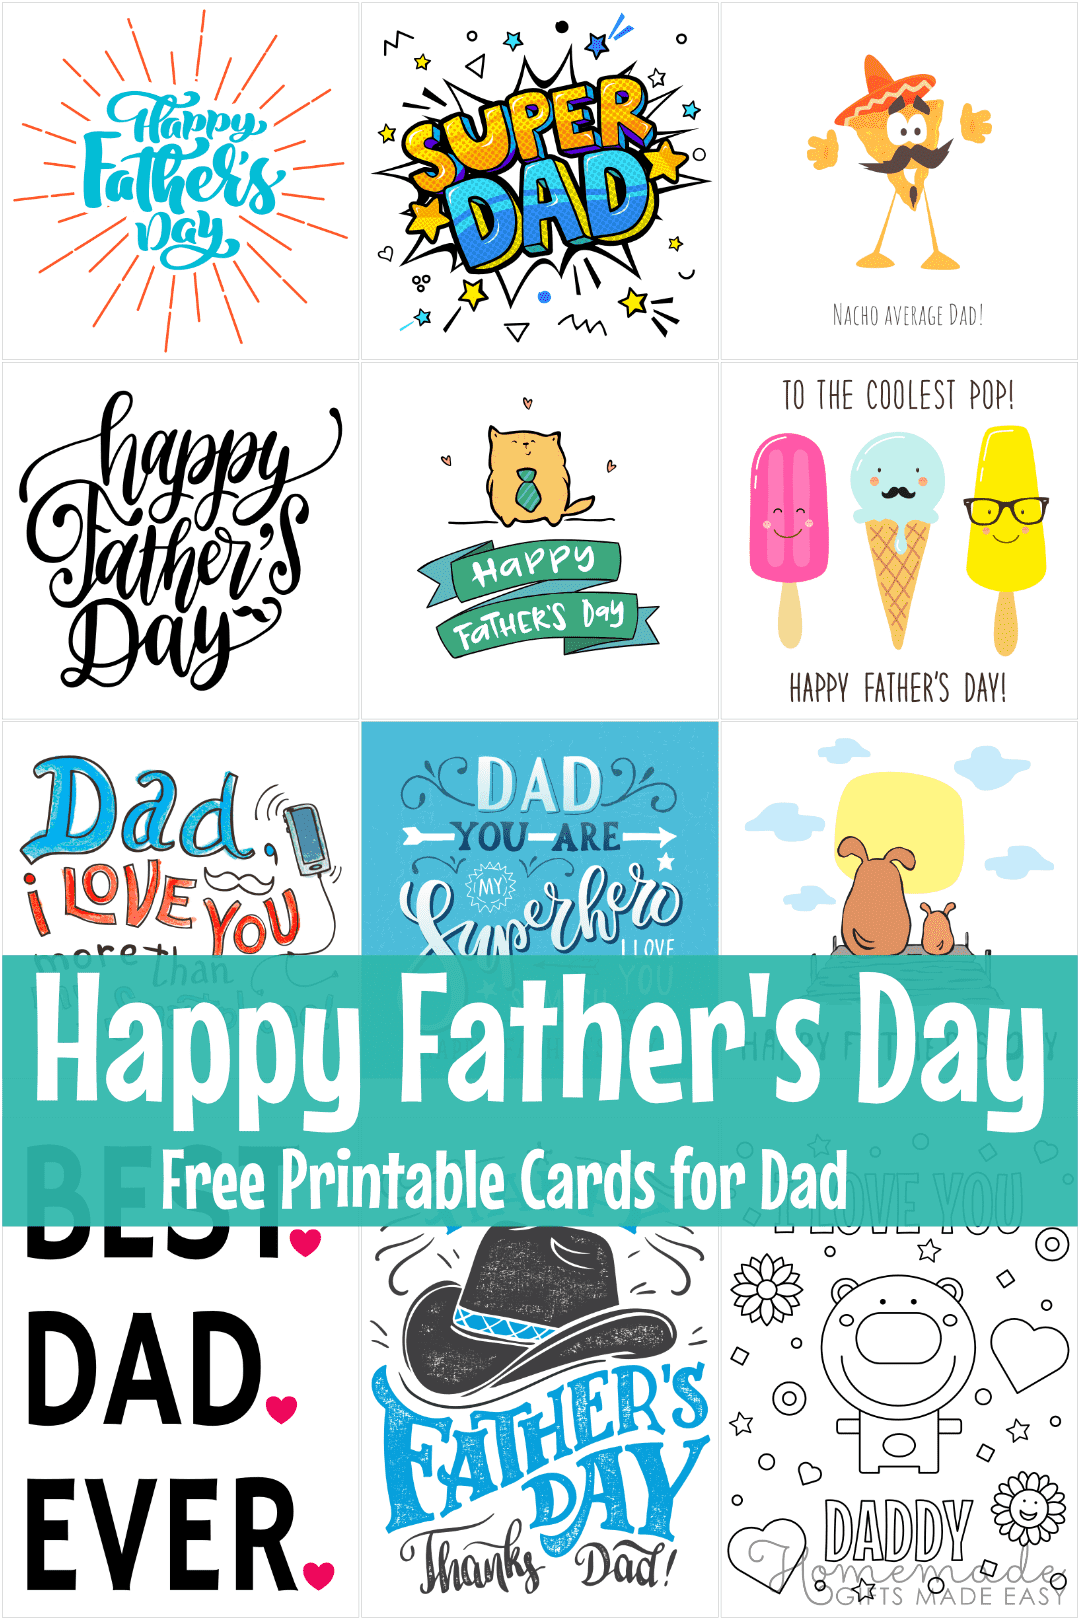 father-s-day-printable-card-celebrate-your-dad-in-style-coo-printable